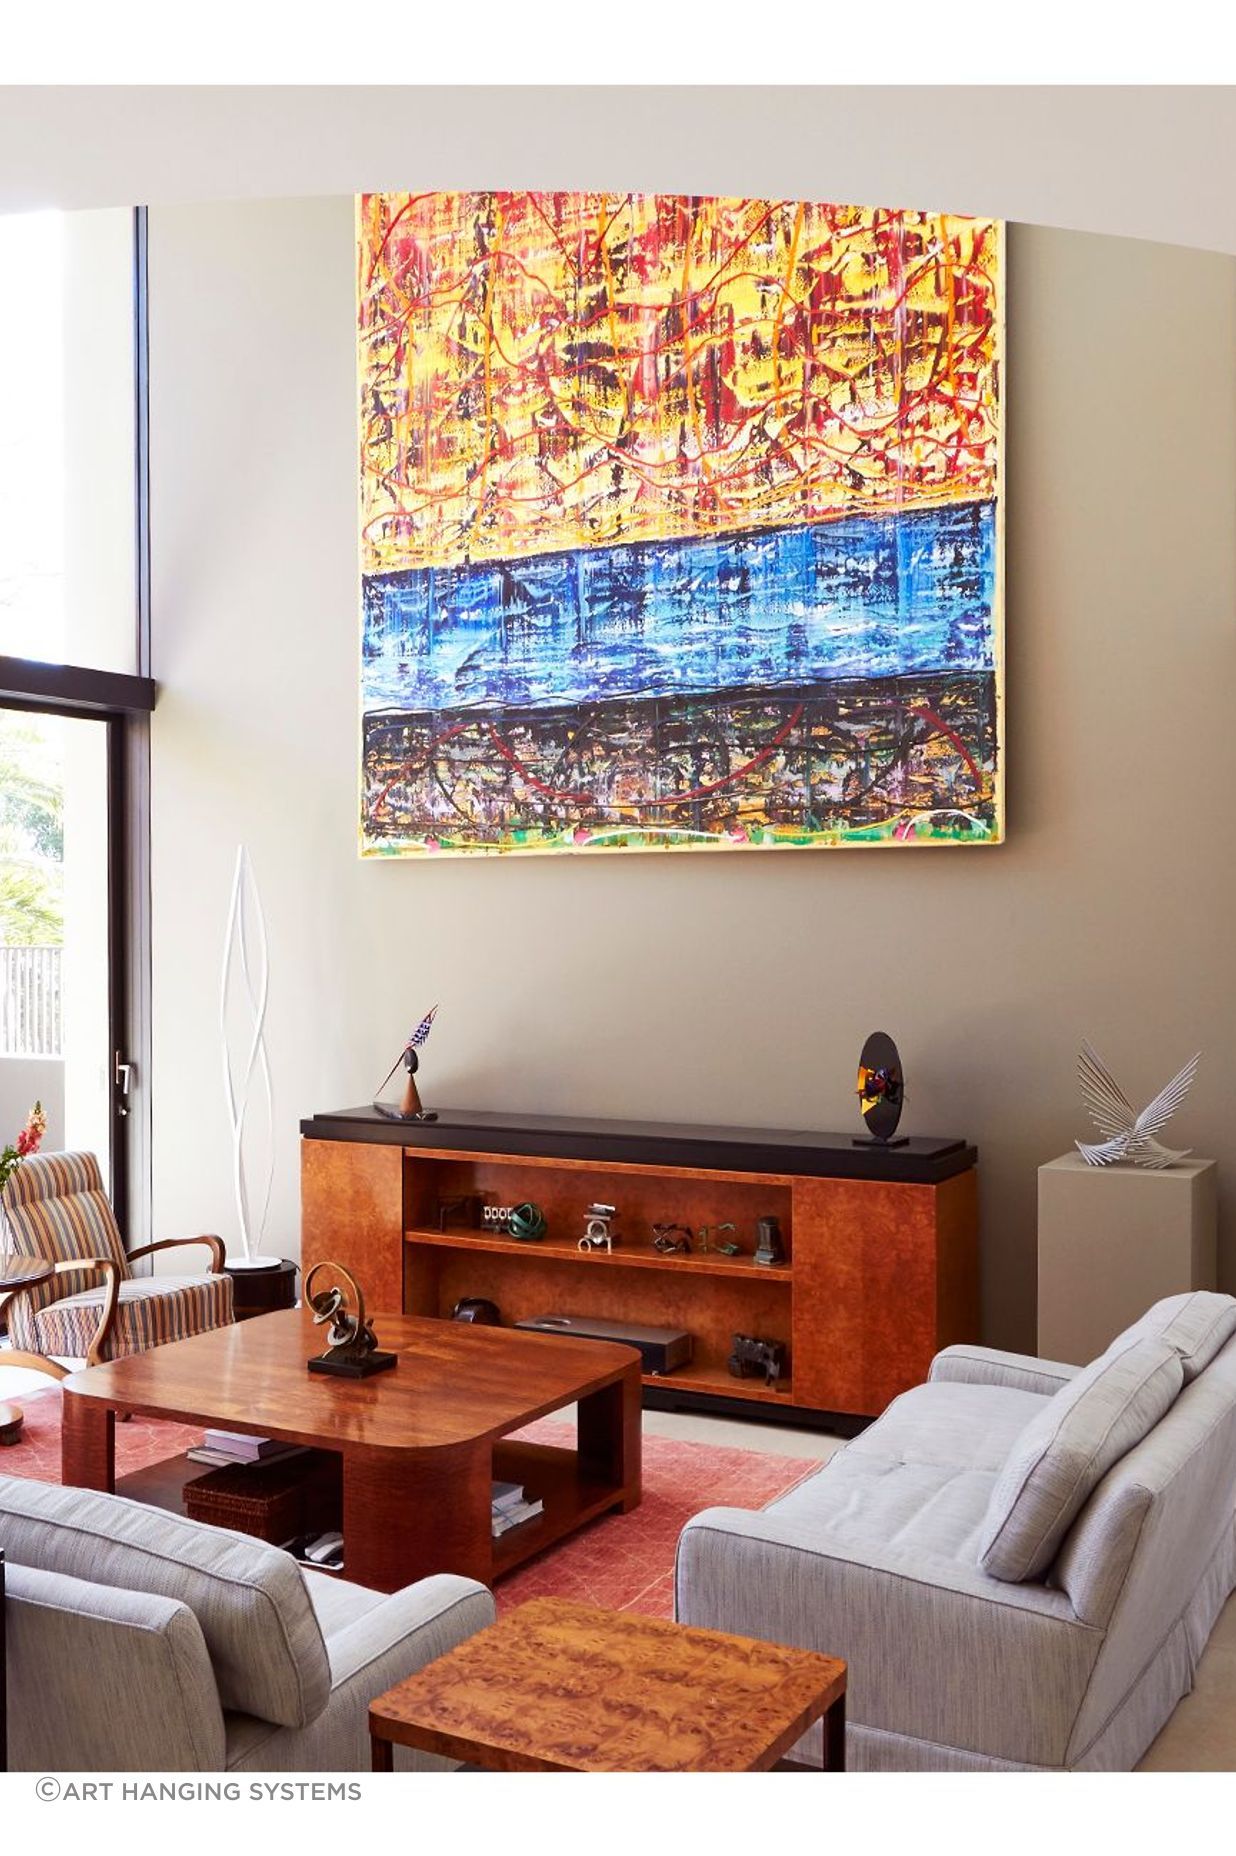 A residence in Bellevue Hill, Sydney with wall art supported by Art Hanging Systems - Photography by: Eamonn McLoughlin